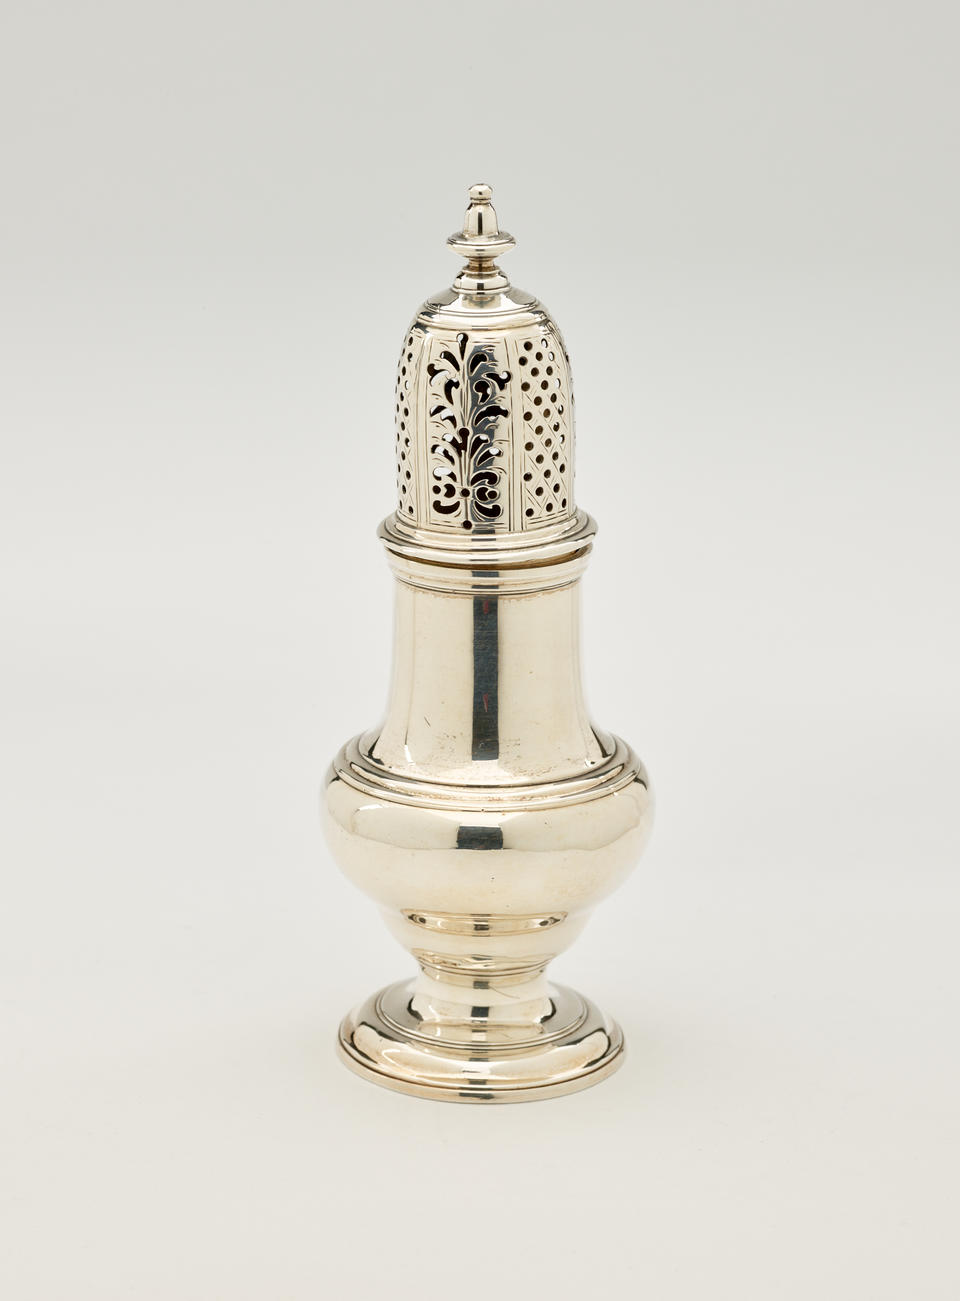 A silver muffineer with a foot, rounded body that goes to a cylindrical top half, and the lid is perforated with small holes and floral cutouts.